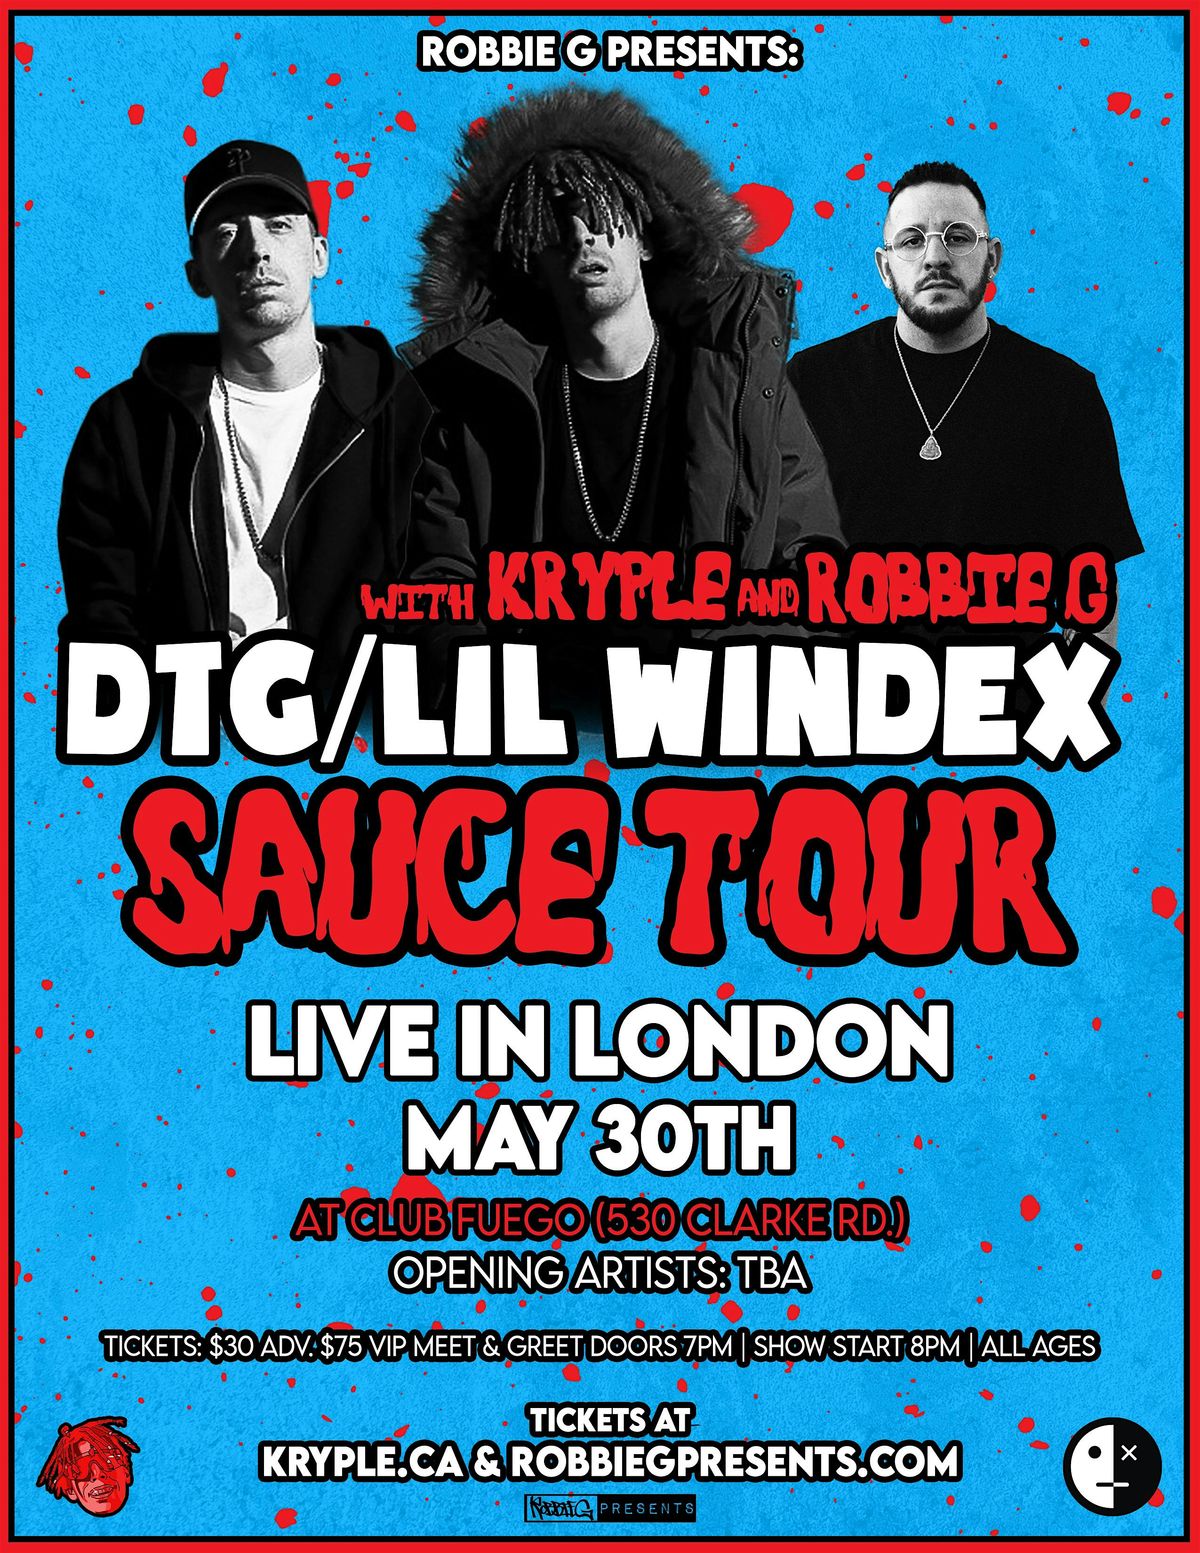 DTG\/Lil Windex Live in Nanaimo June 30th at The Queen's with Kryple